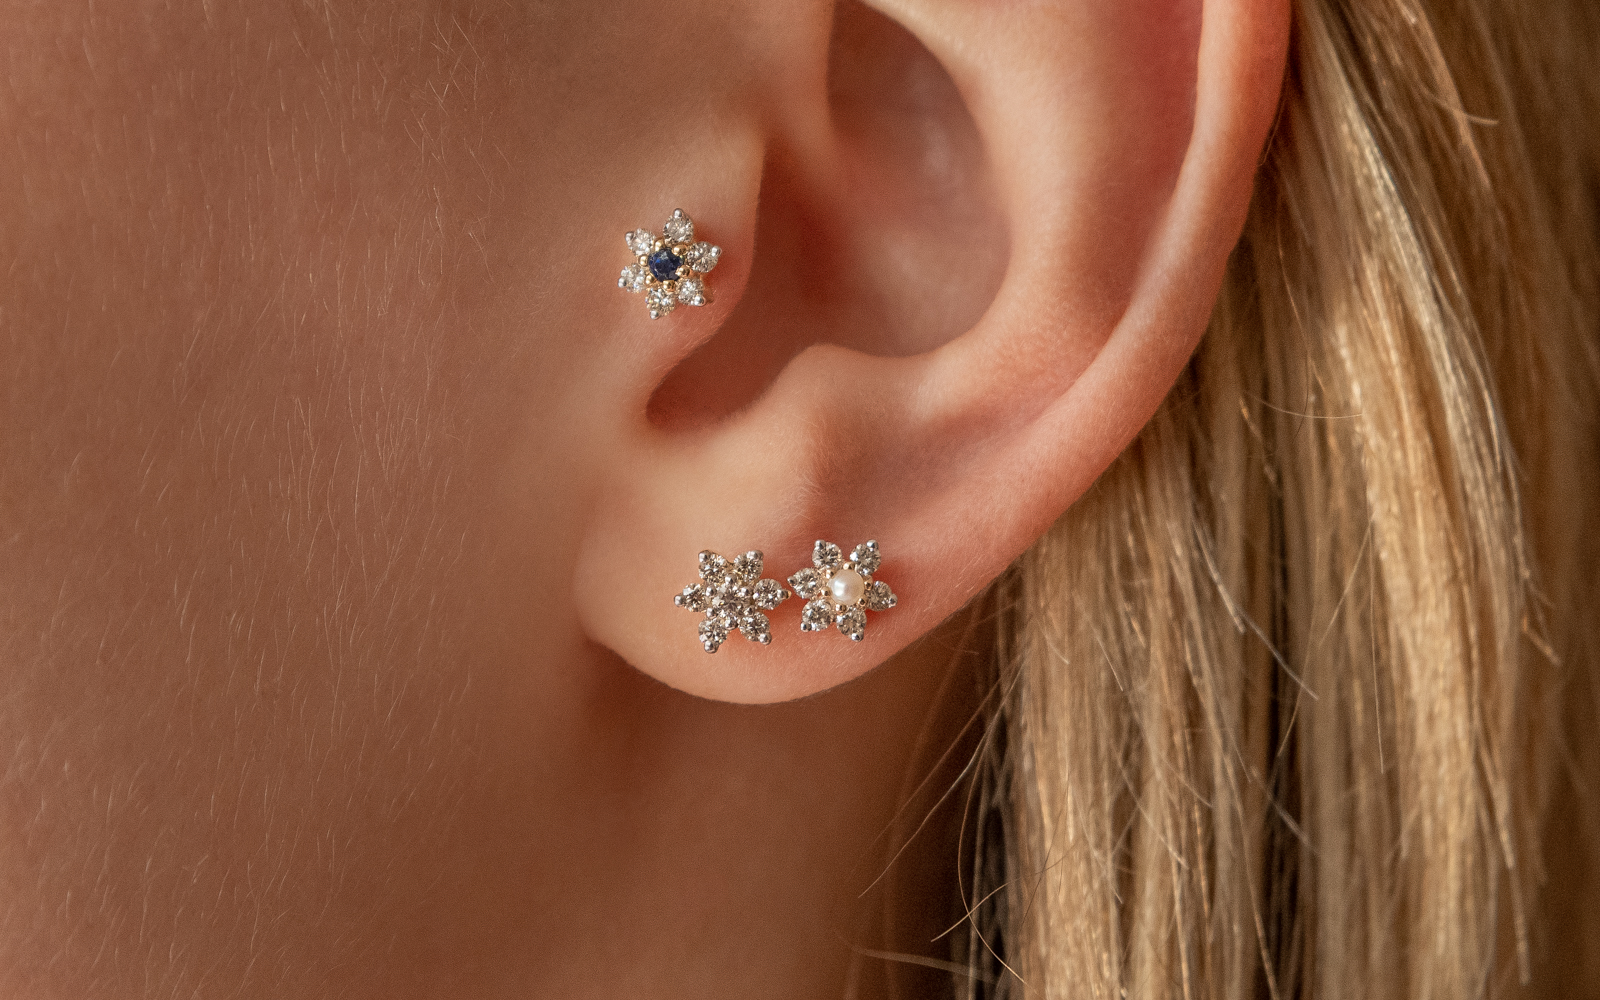 Lux Floral Cluster Earring Diamonds White Gold